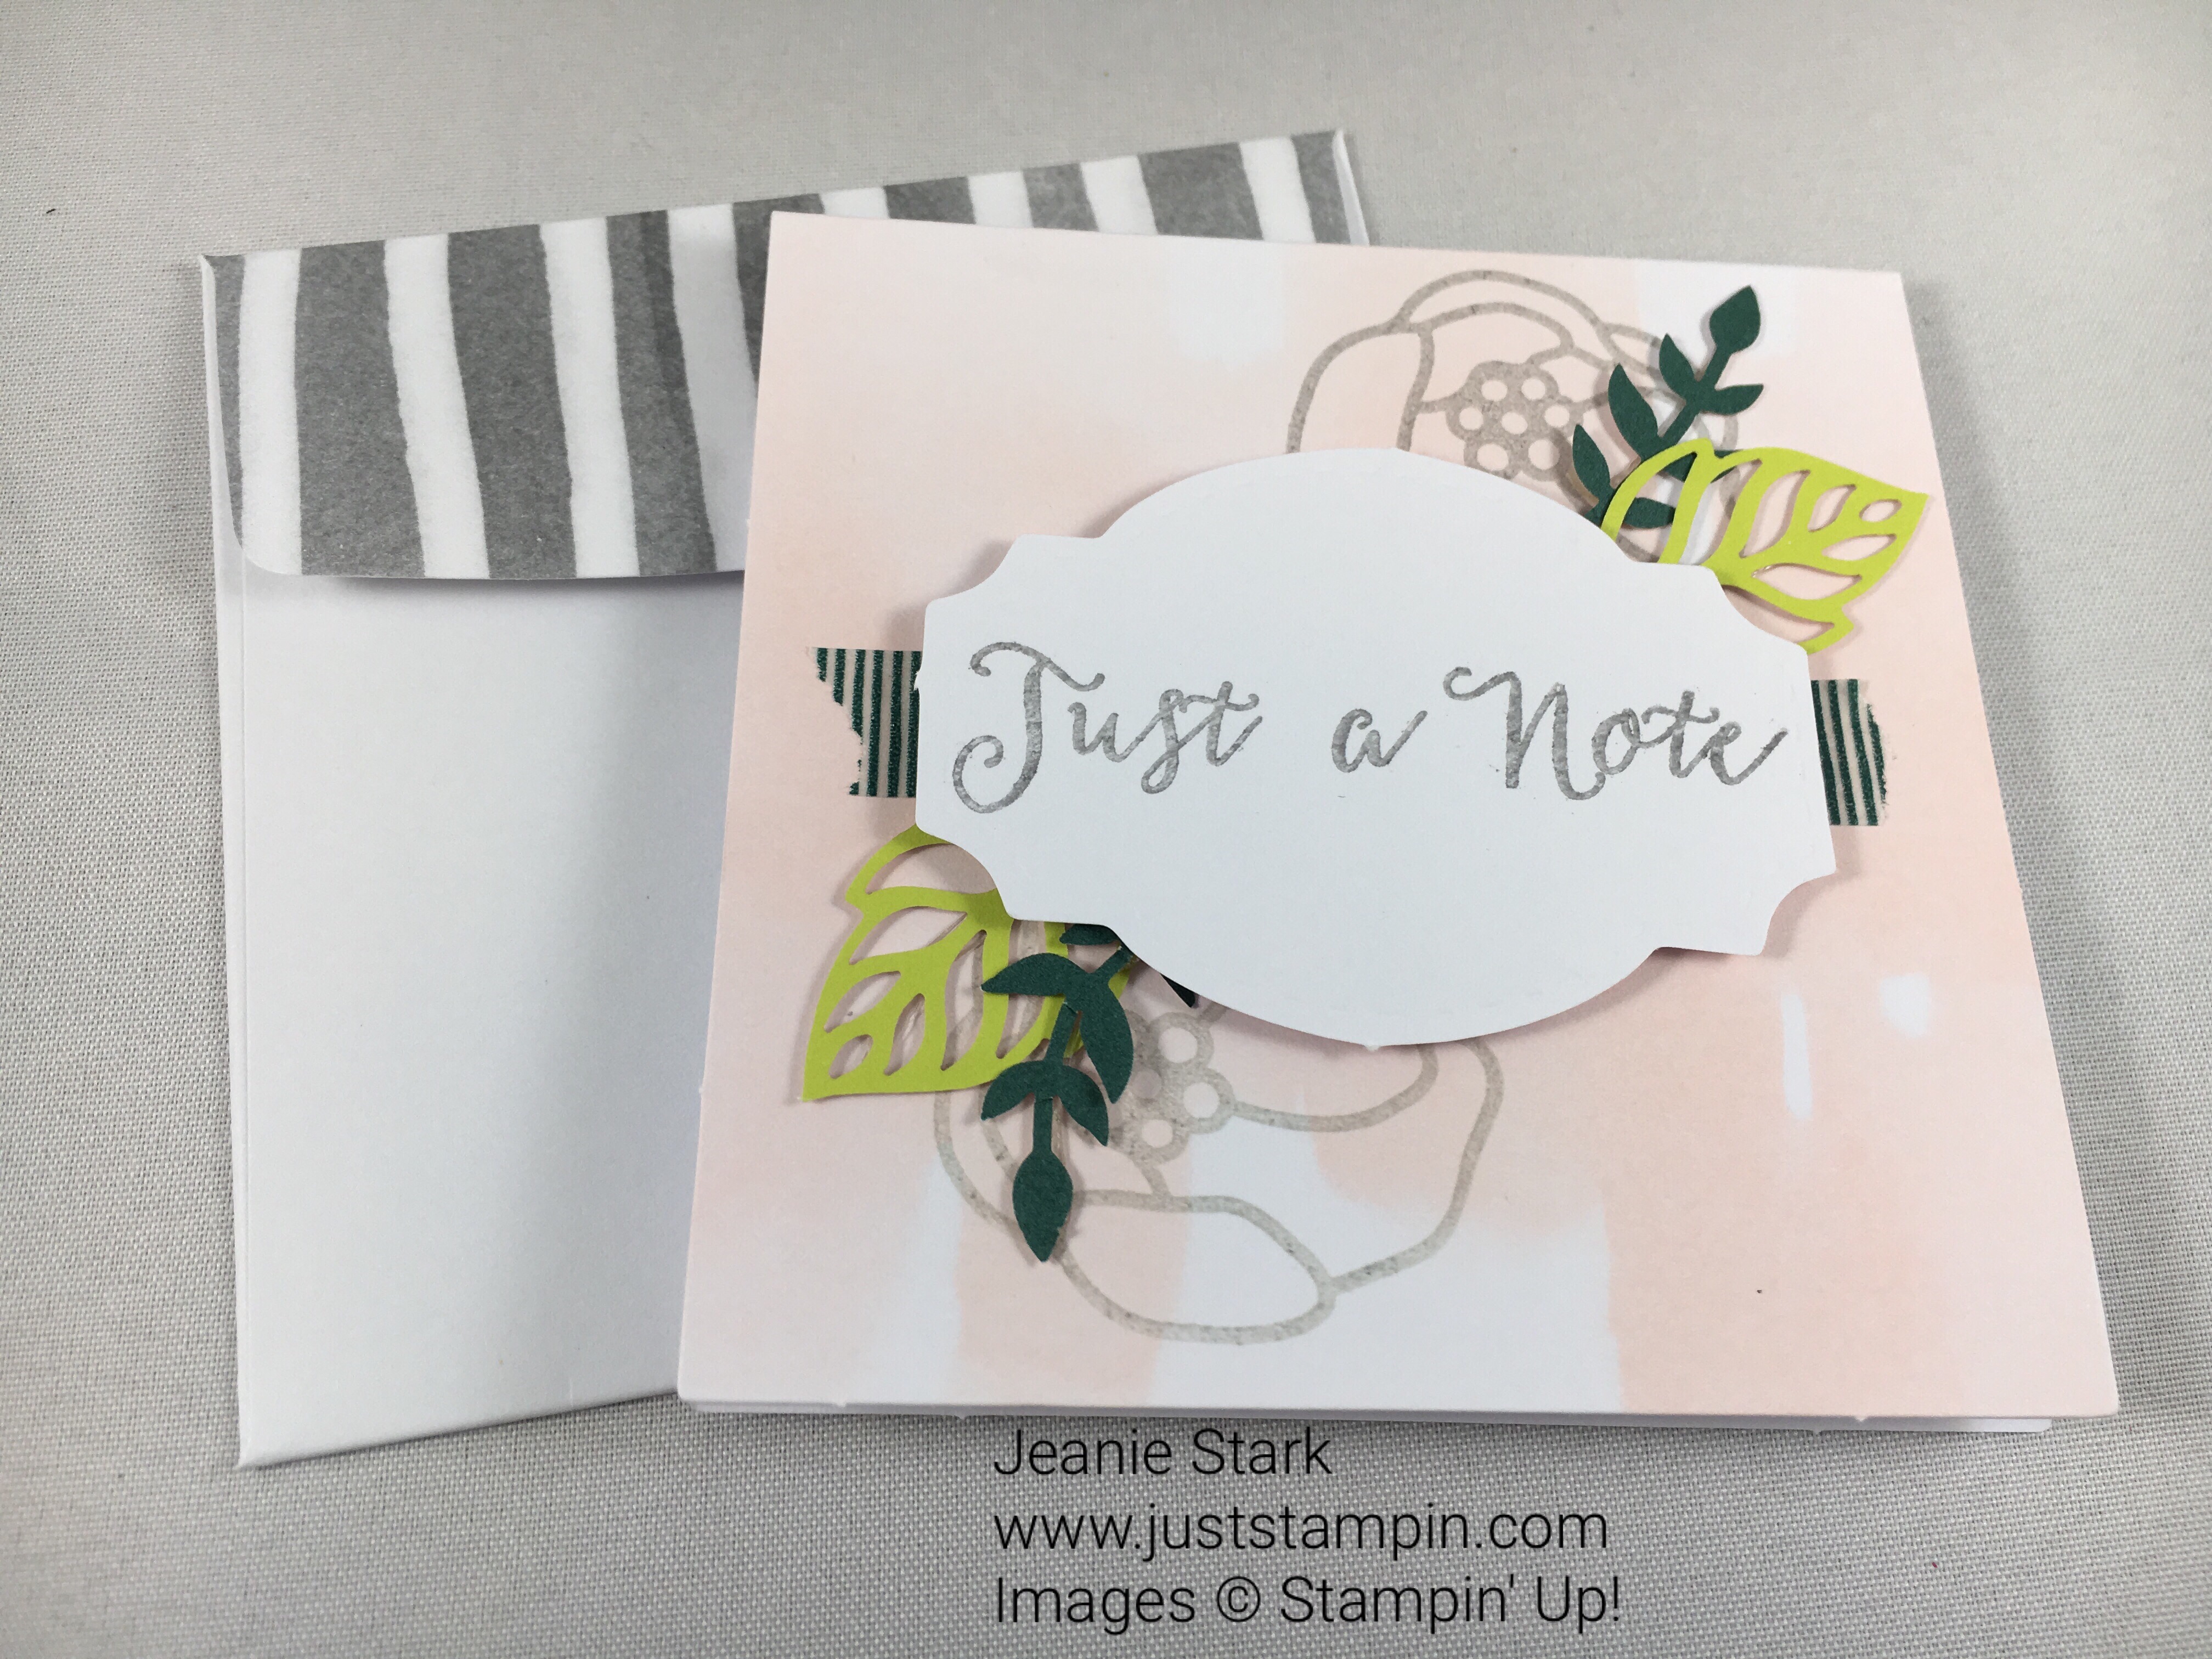 Stampin Up Soft Sayings Card kit. For inspiration, classes, and supplies visit www.juststampin.com